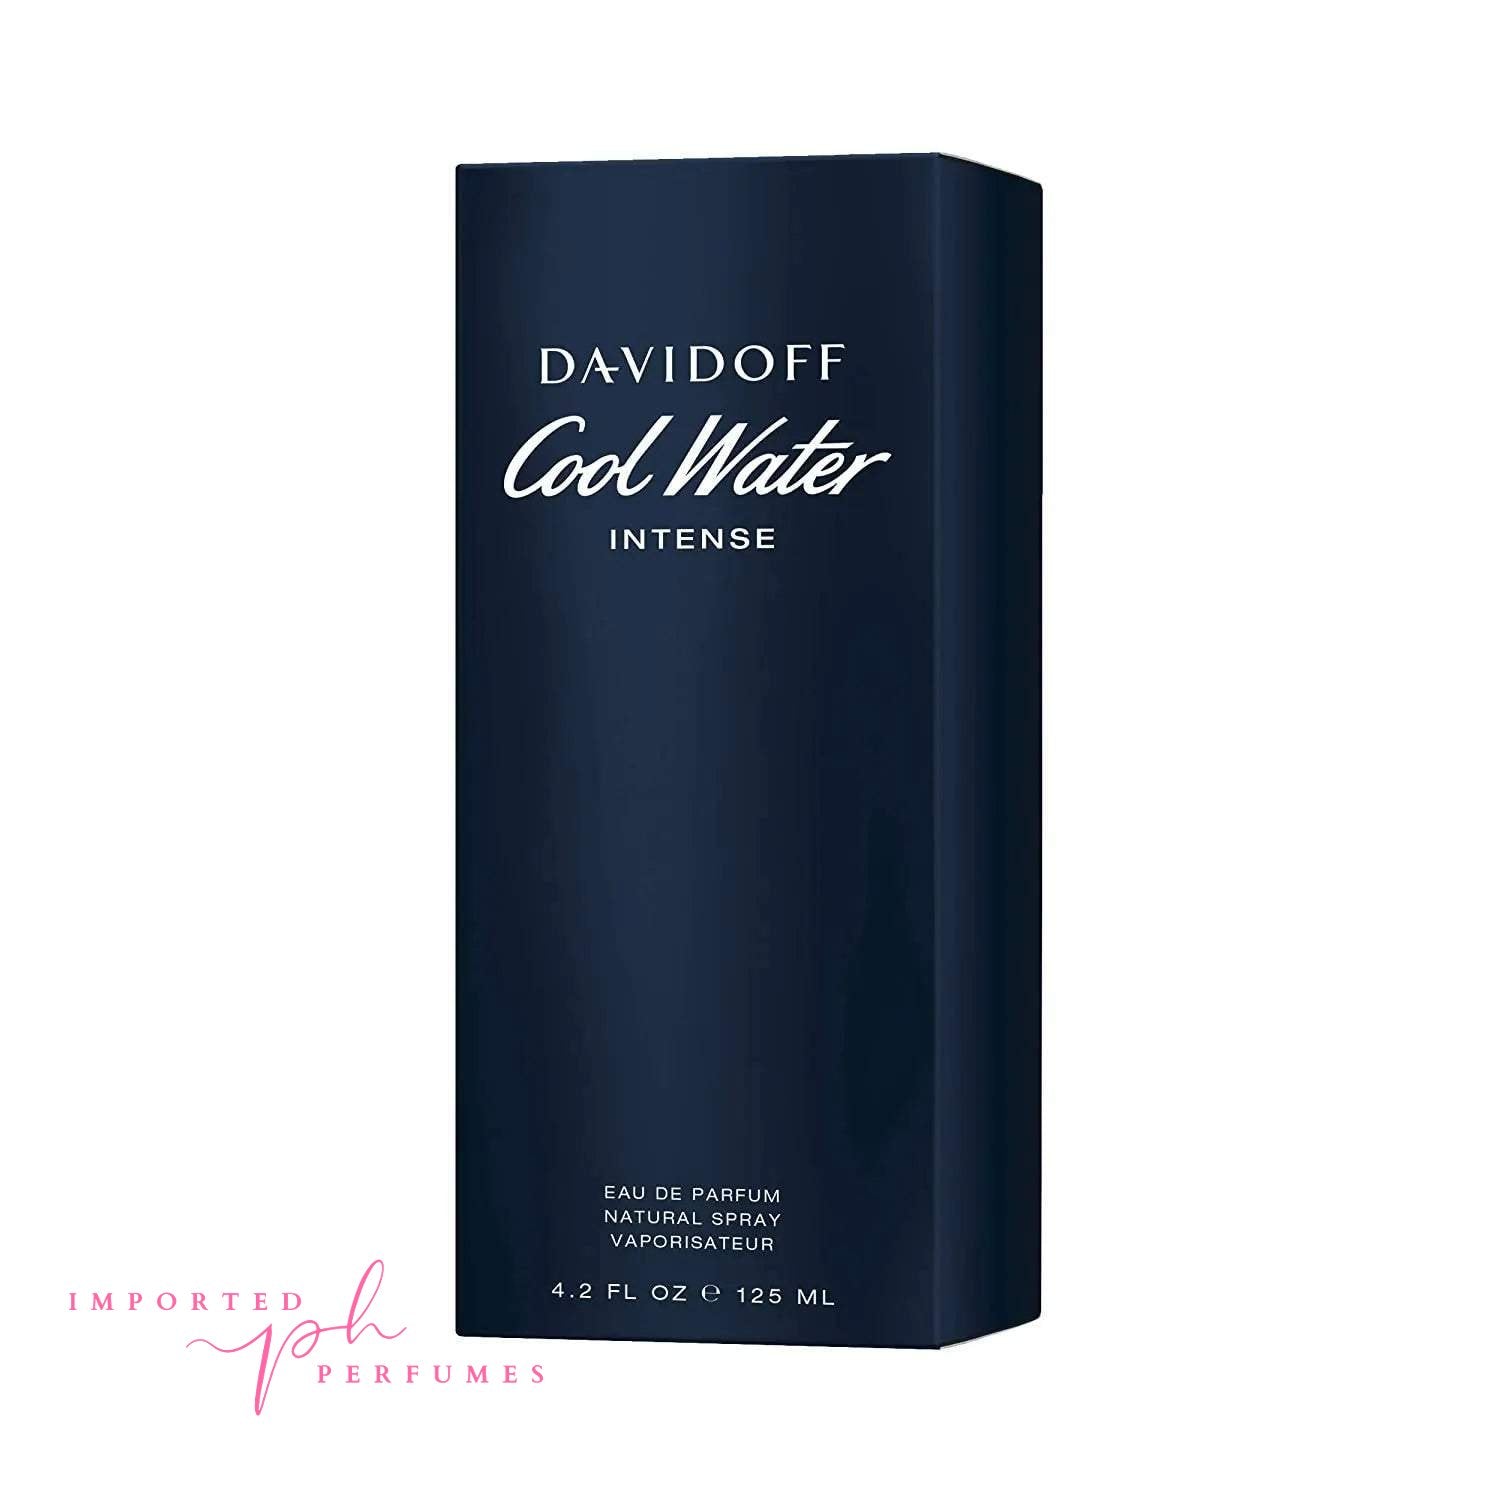 Cool Water Intense by Davidoff for Men Eau de Parfum 125ml-Imported Perfumes Co-cool water intense,Cool water men,david,Davidoff,men